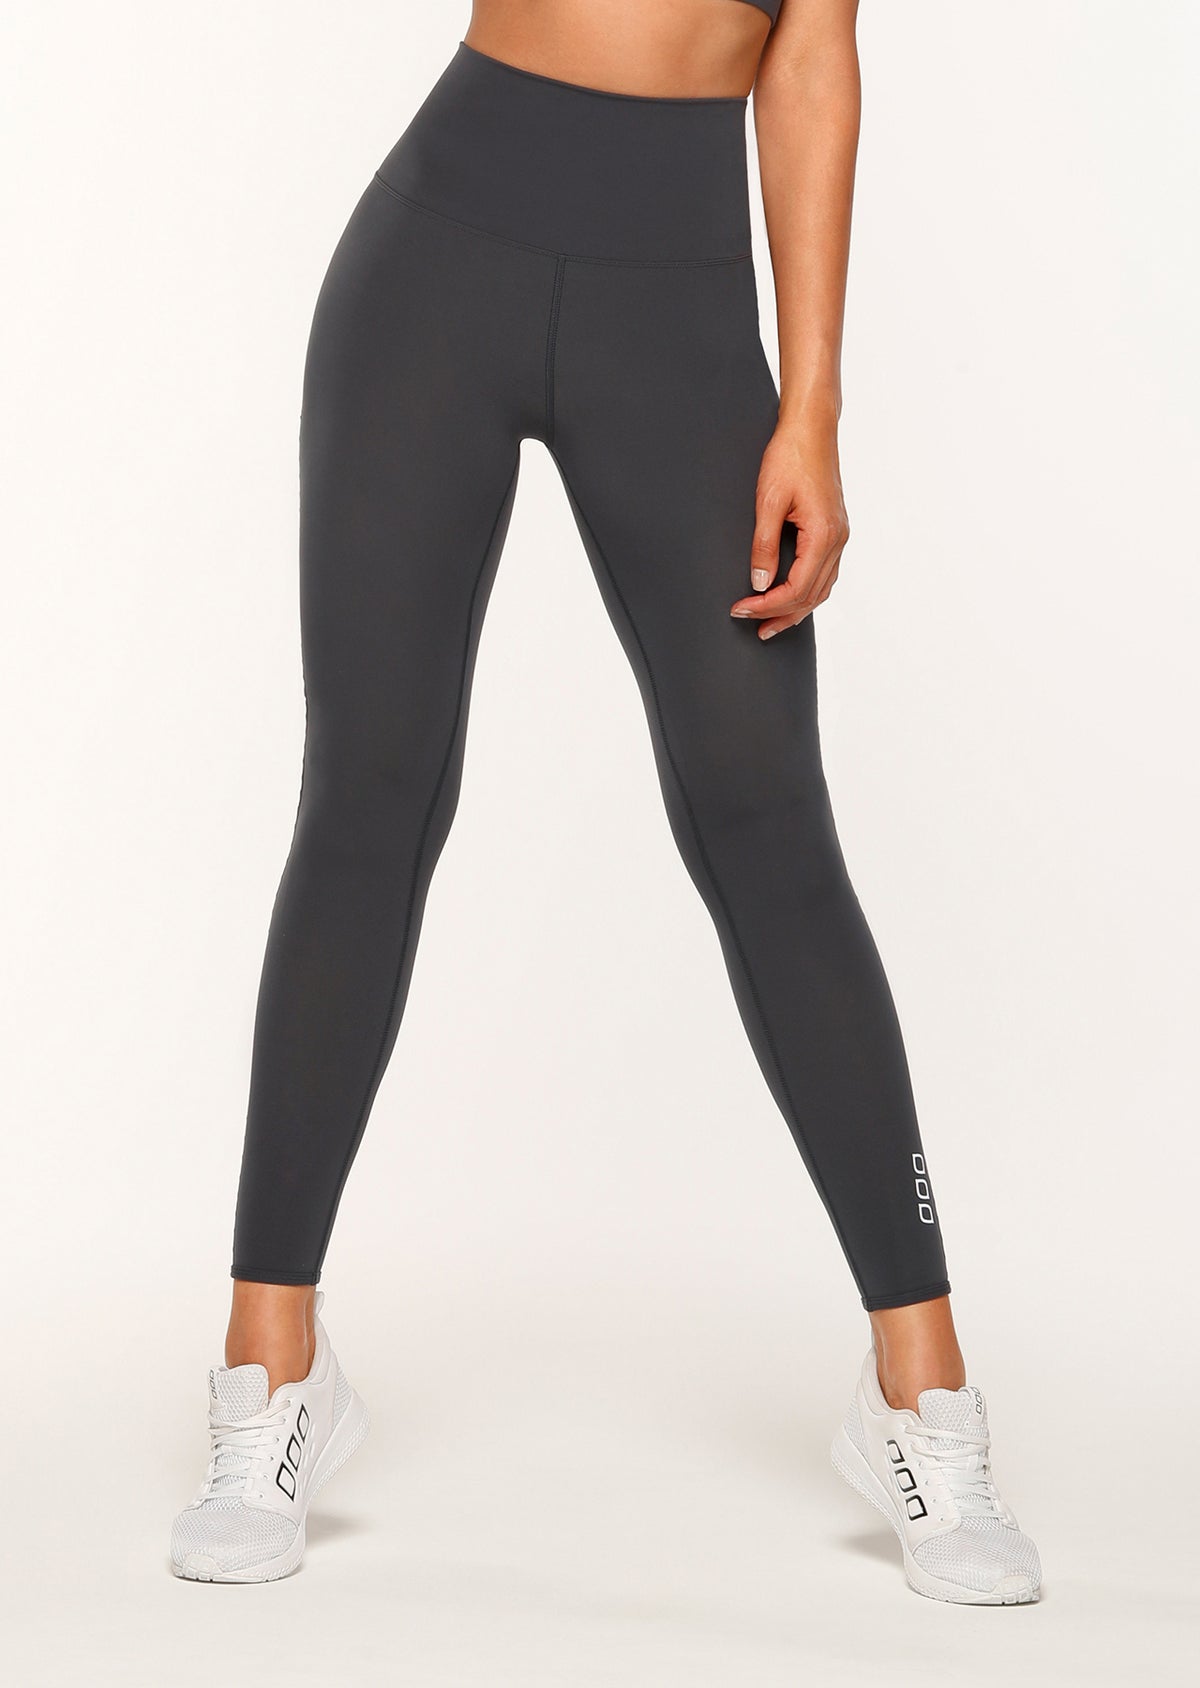 Lorna Jane Invisible Feel F/L Tight in Canyon